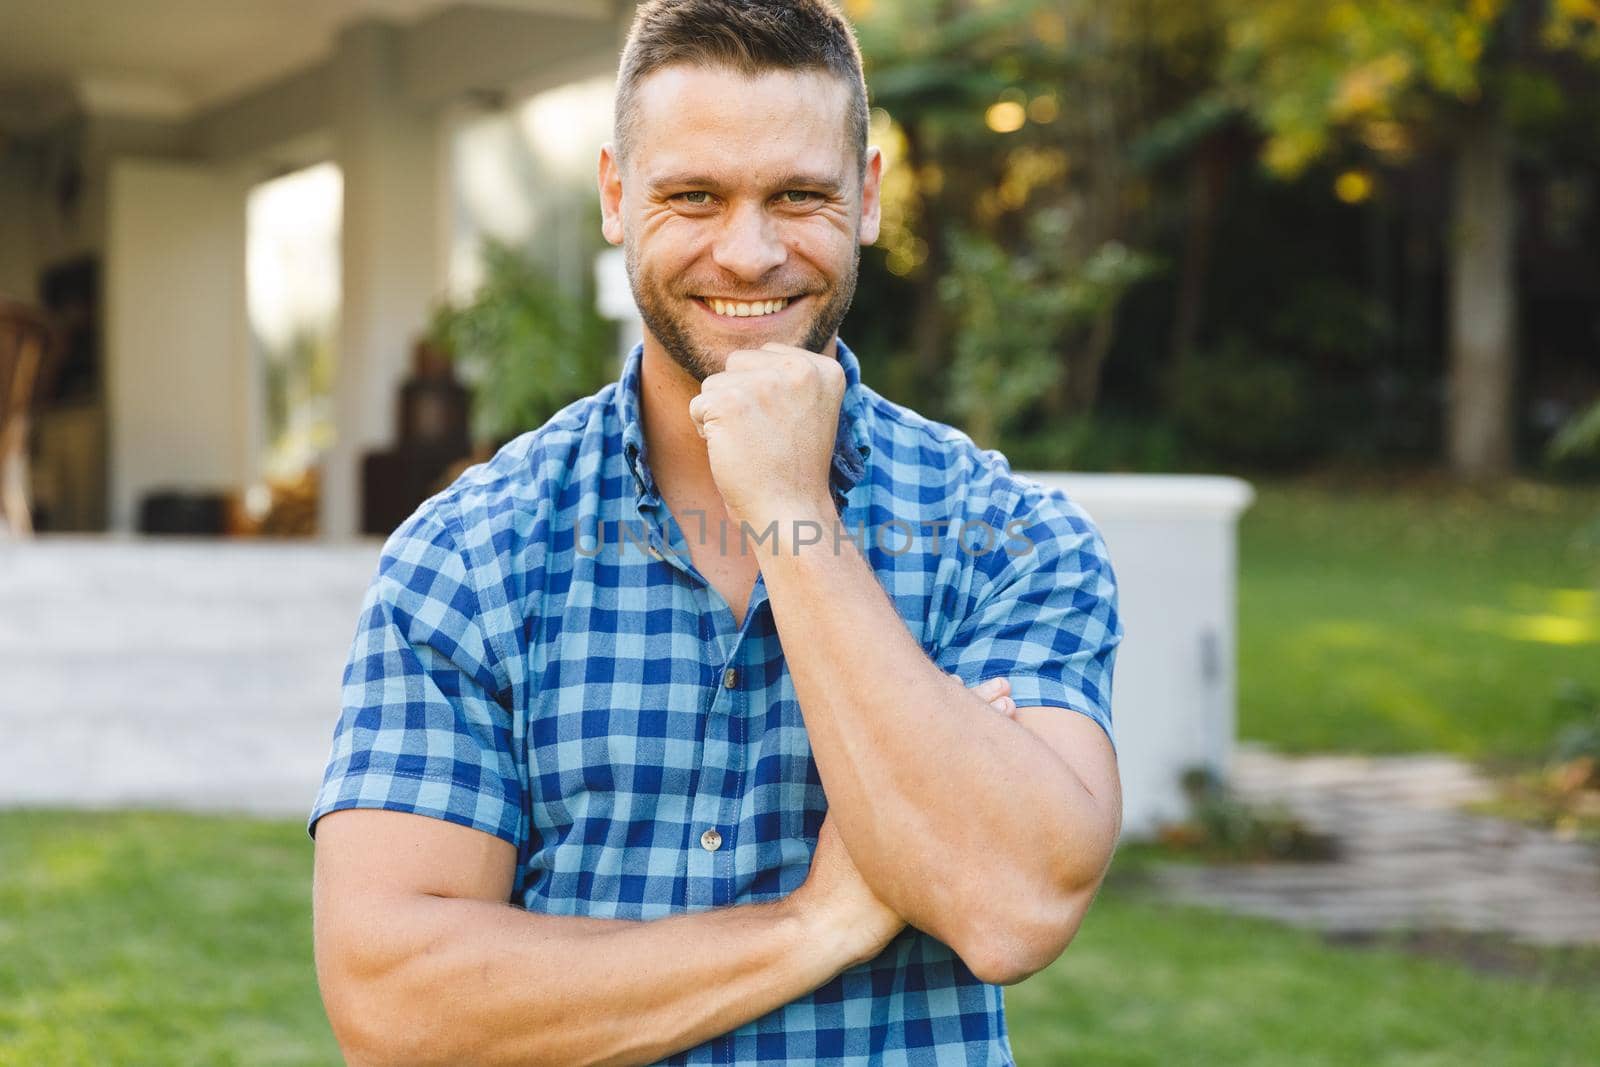 Portrait of smiling caucasian man outside house looking at camera in garden by Wavebreakmedia